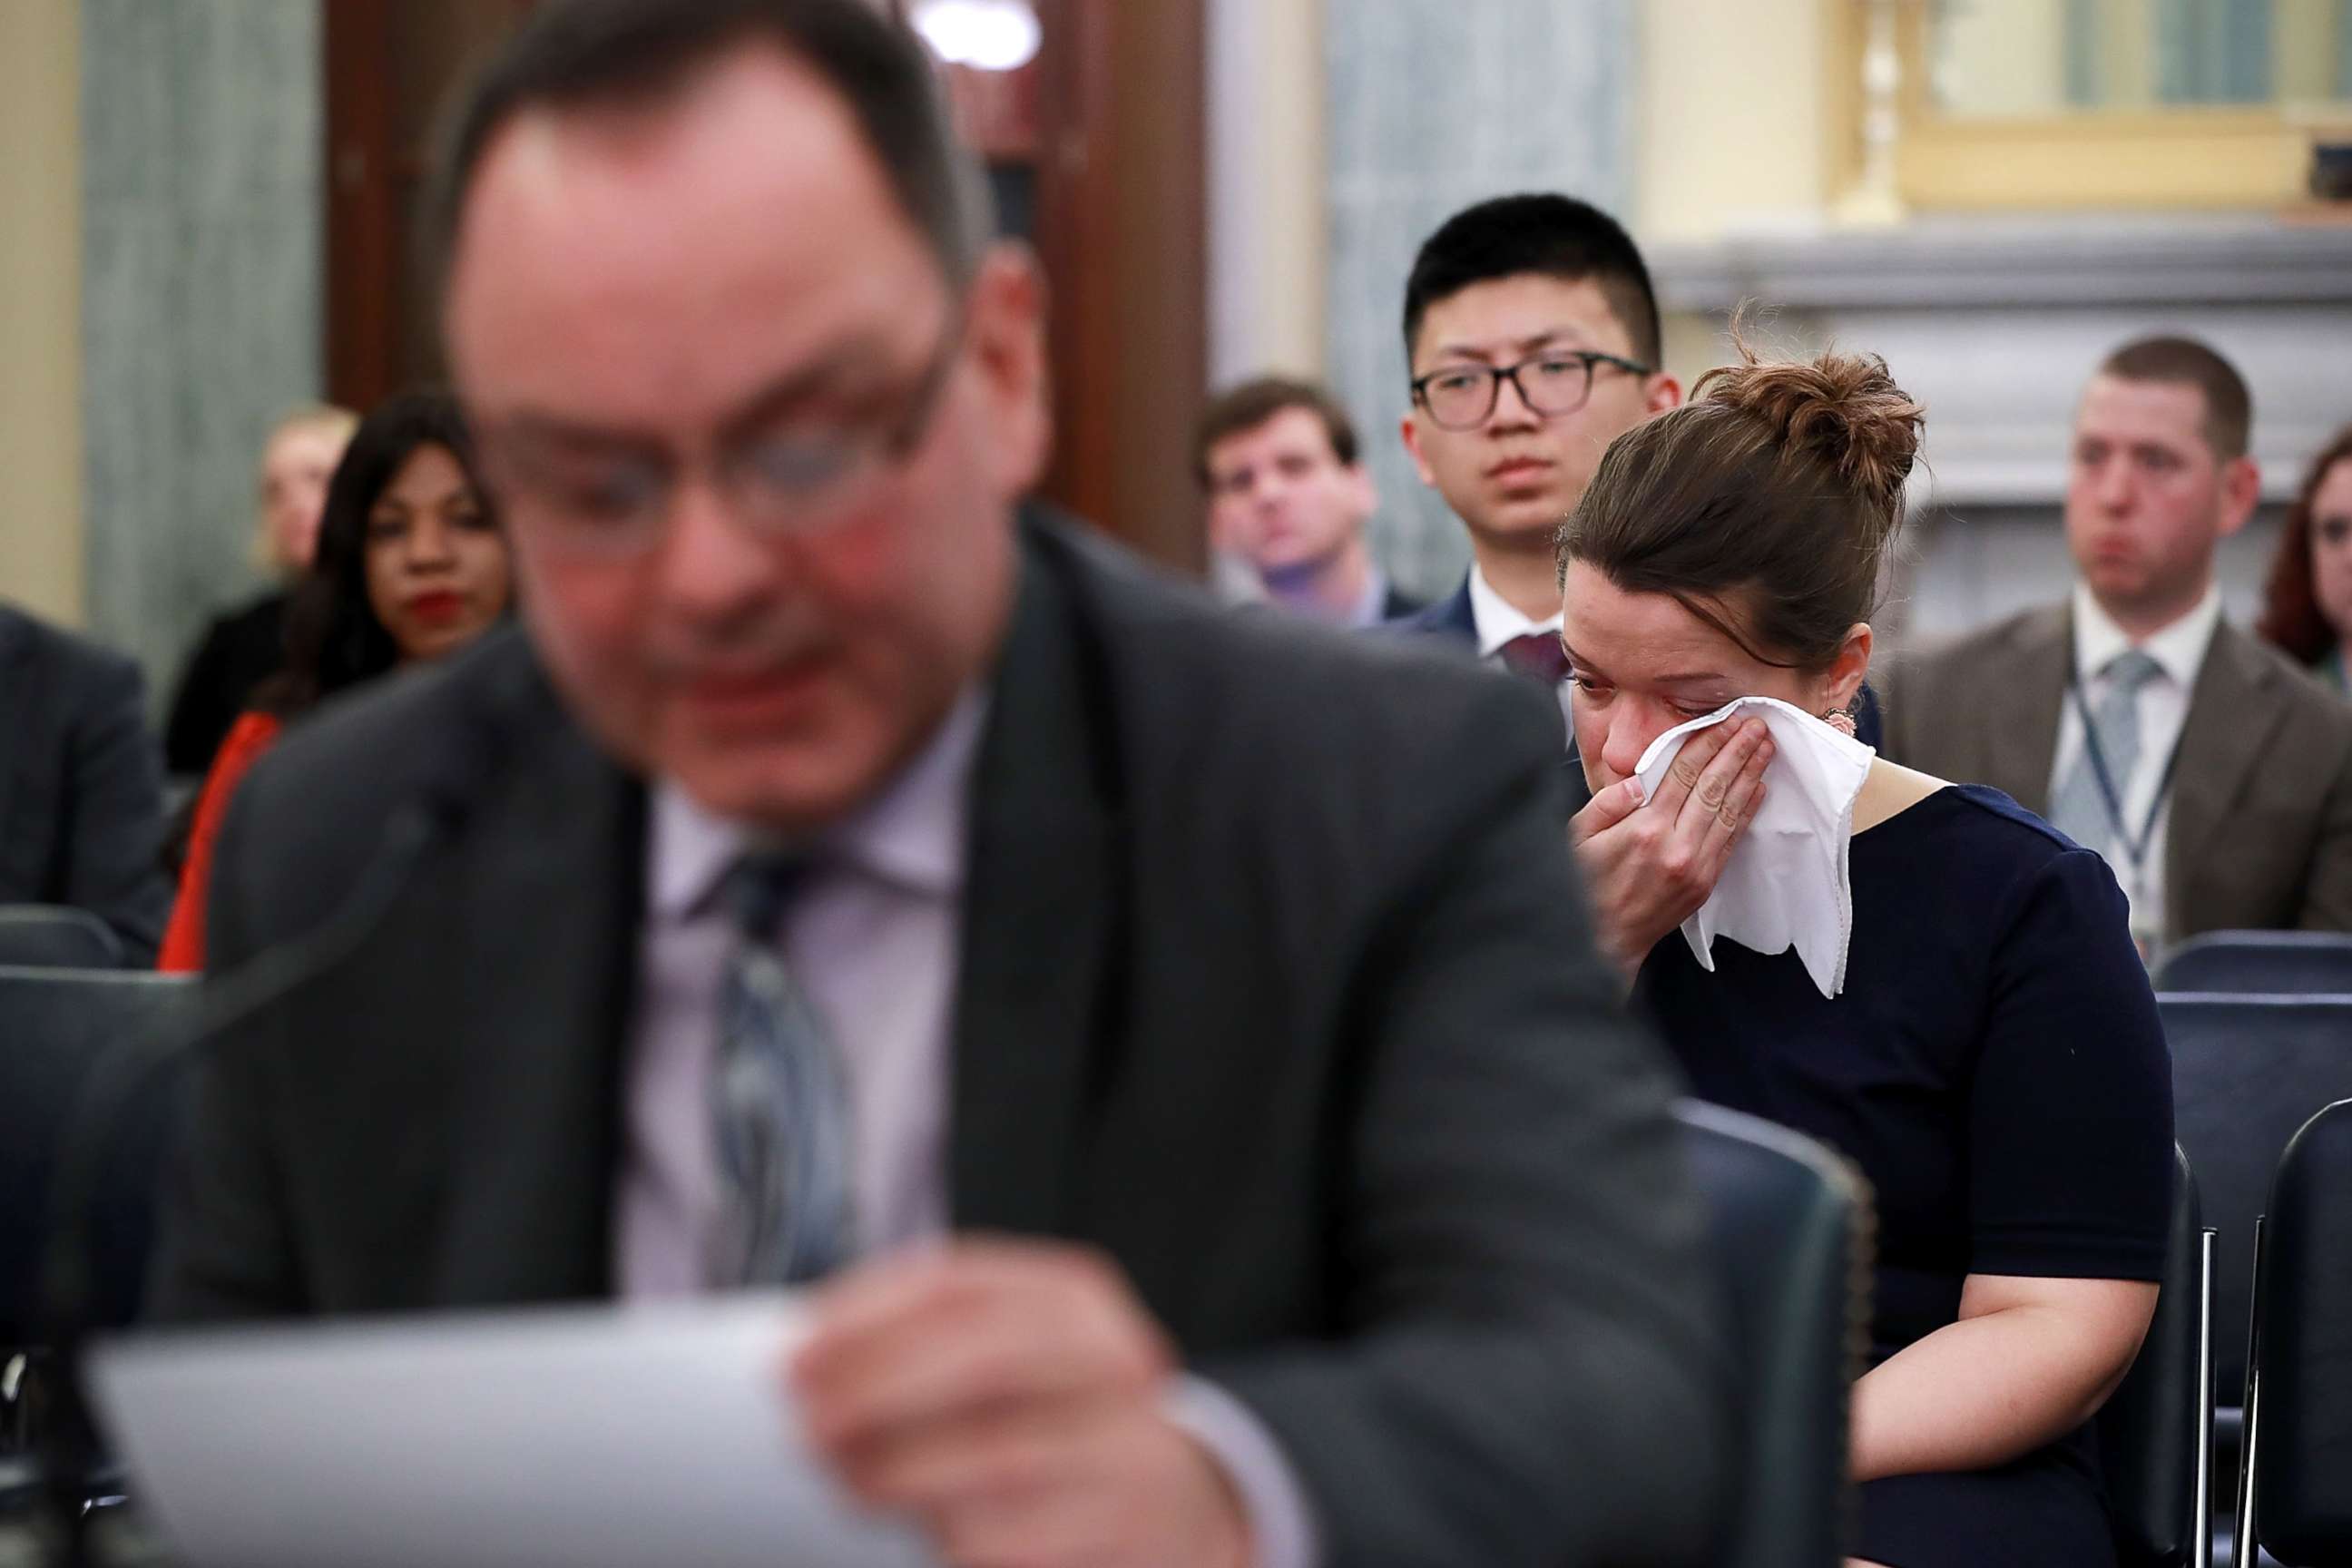 PHOTO: A woman weeps while listening to figure skater Craig Maurizi recount his sexual abuse at the hands of his coach when he was 13 years old while testifying before a Senate subcommittee on Capitol Hill April 18, 2018 in Washington.